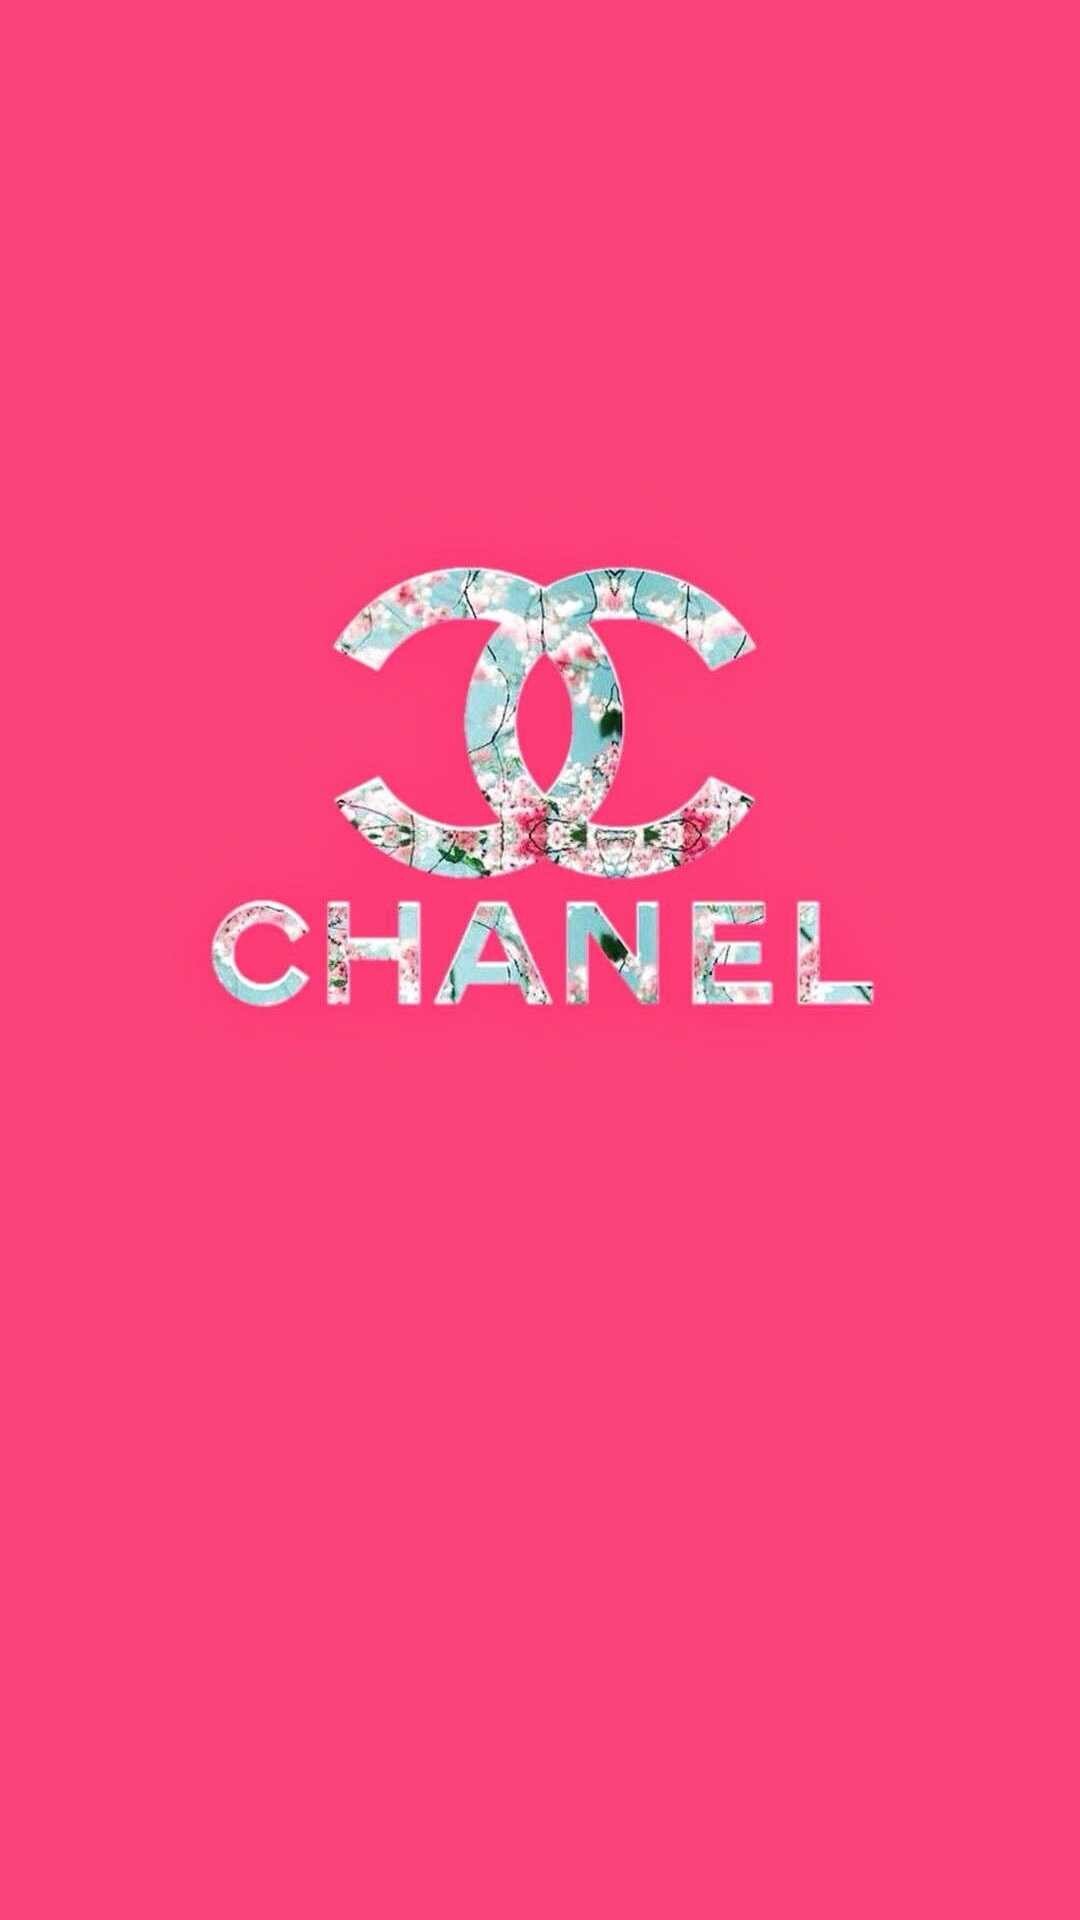 Chanel: The brand's products have been personified by male and female fashion models, idols, and actresses, including Margot Robbie, Lily-Rose Depp, Nicole Kidman, Keira Knightley, Kristen Stewart, Pharrell Williams, Cara Delevingne, and Marilyn Monro. 1080x1920 Full HD Wallpaper.